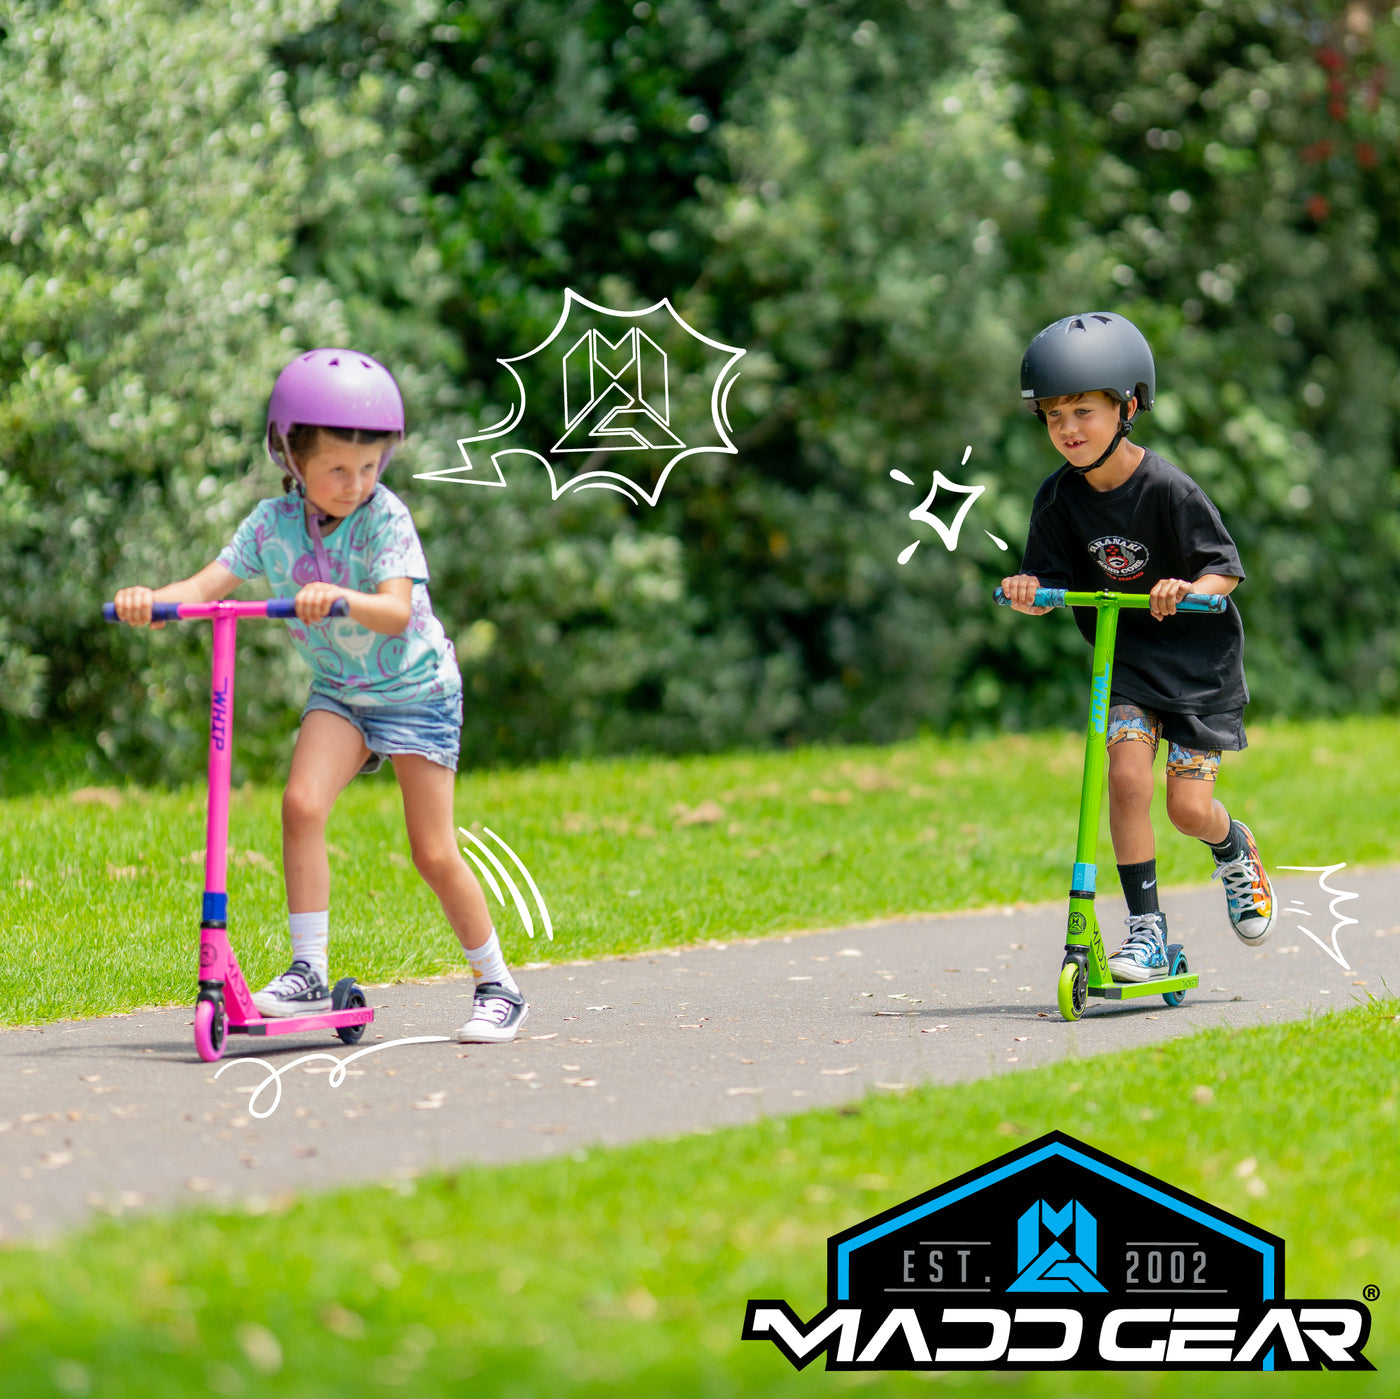 Madd Gear Smooth High Quality Fun Colorful Scooters